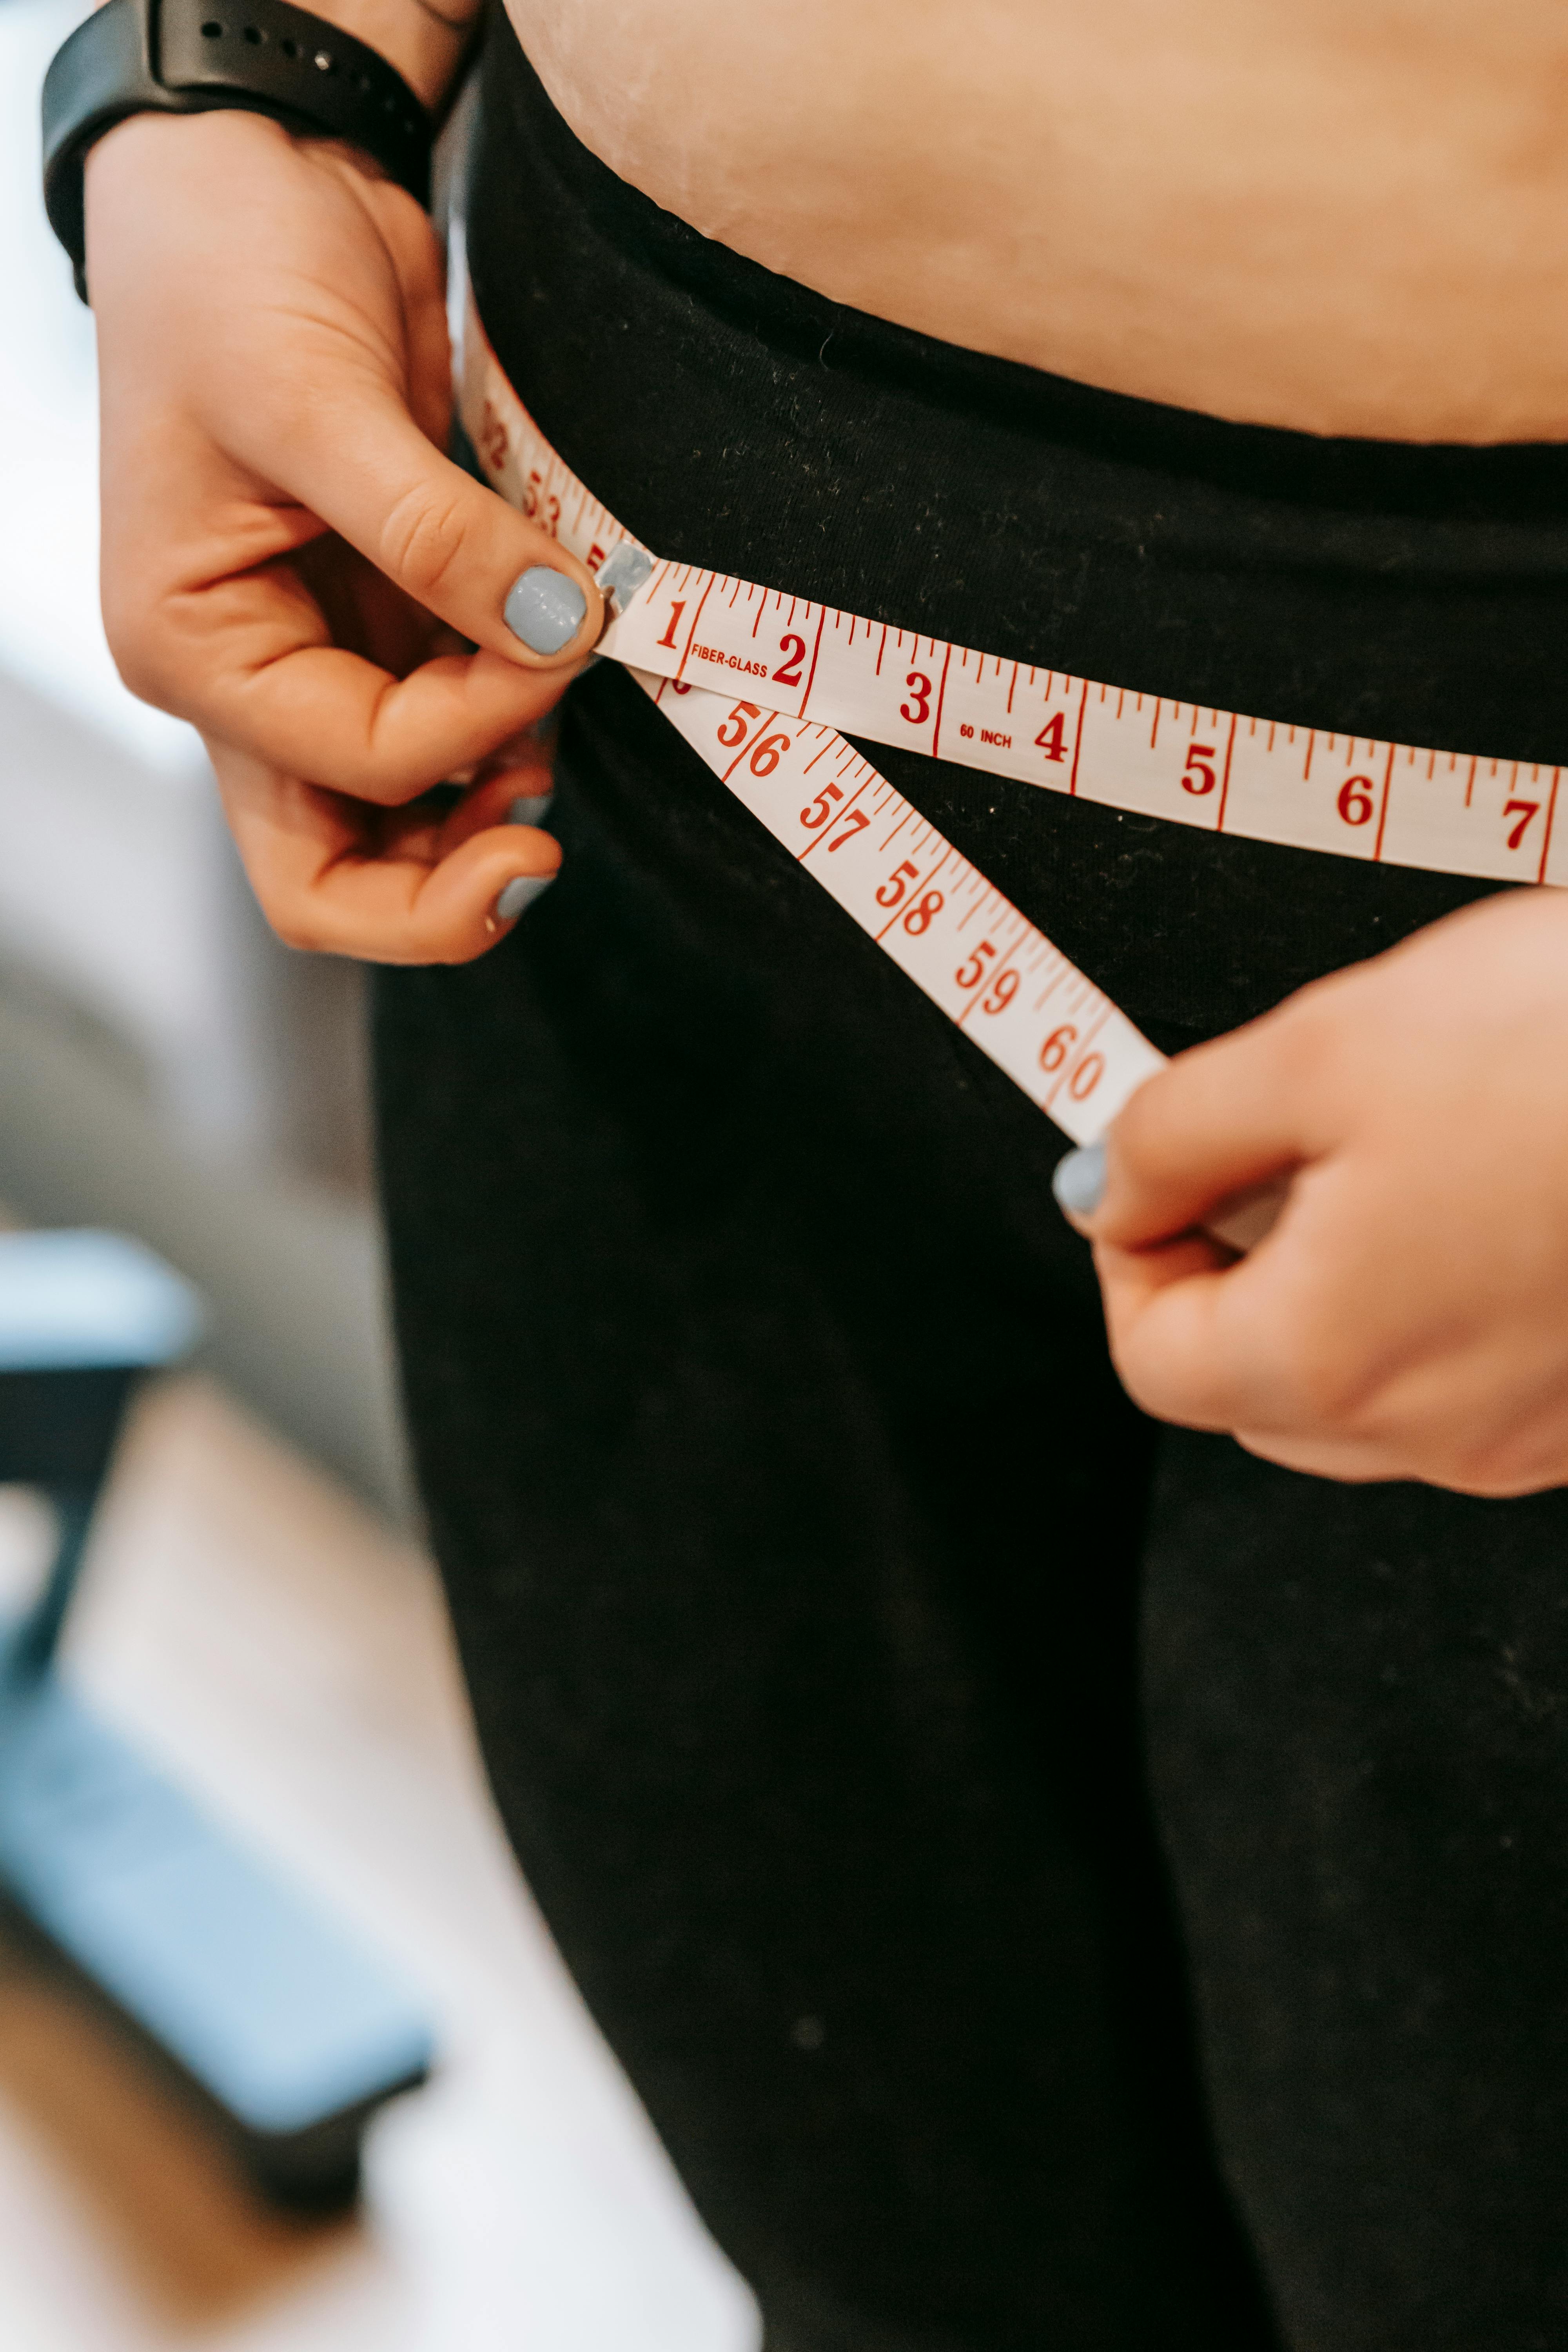 A woman with a tape measure | Source: Pexels